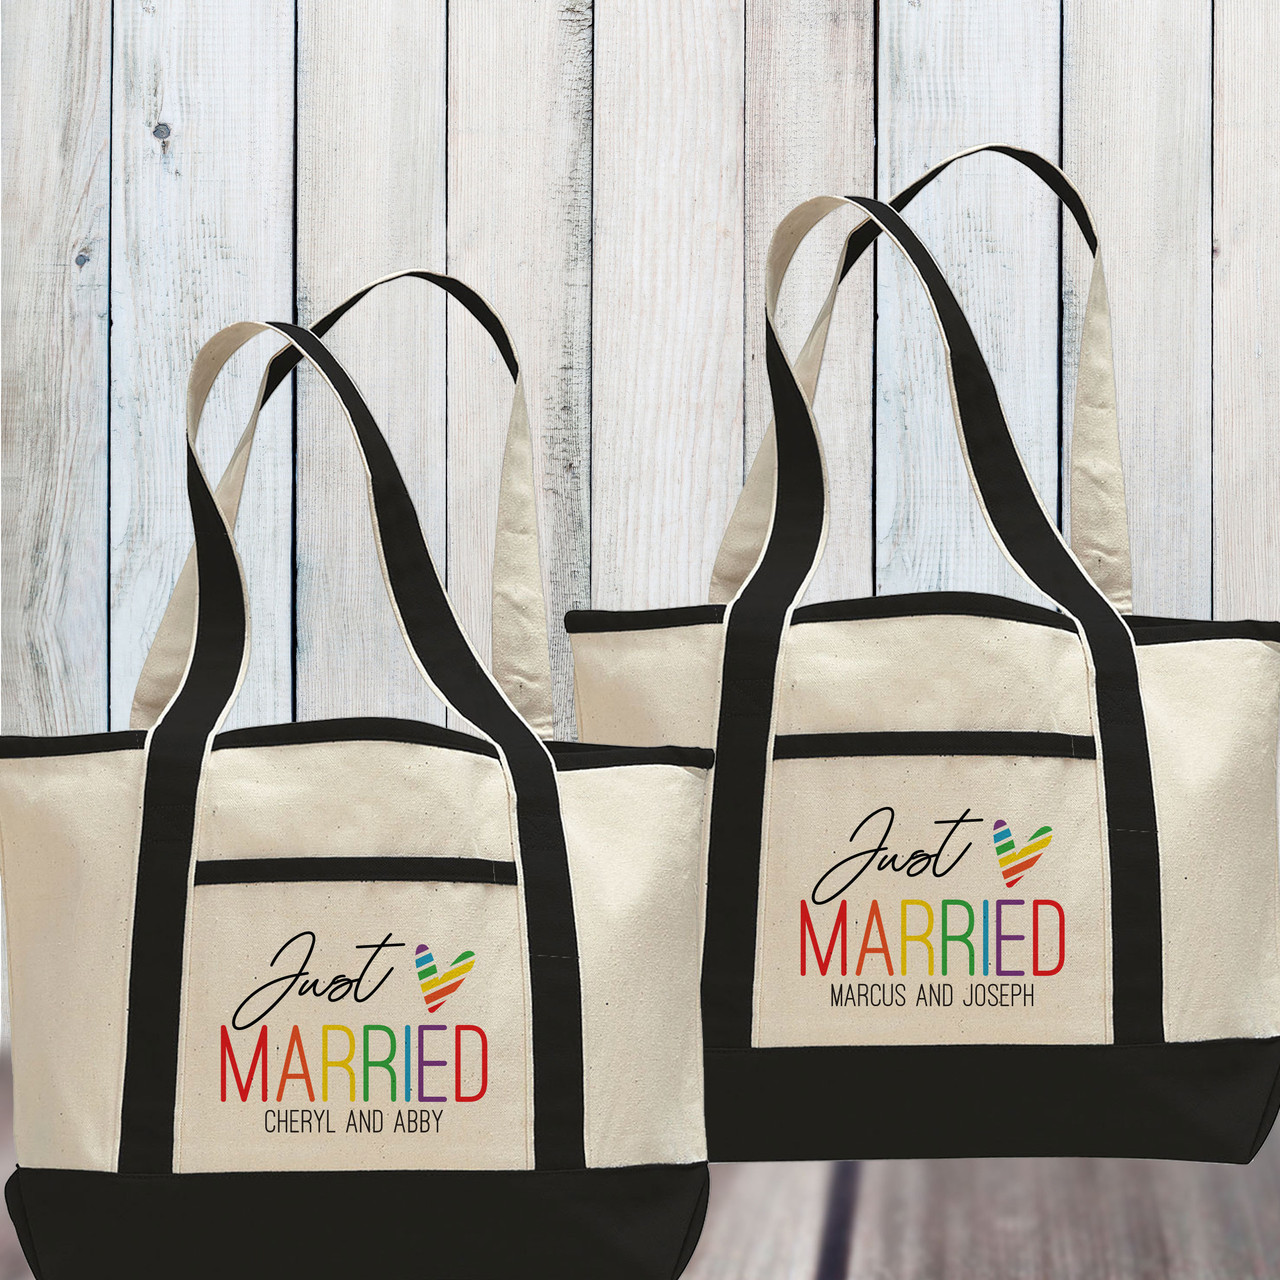 Just Married Personalized Beach Tote Bag for Same Sex Couple photo photo